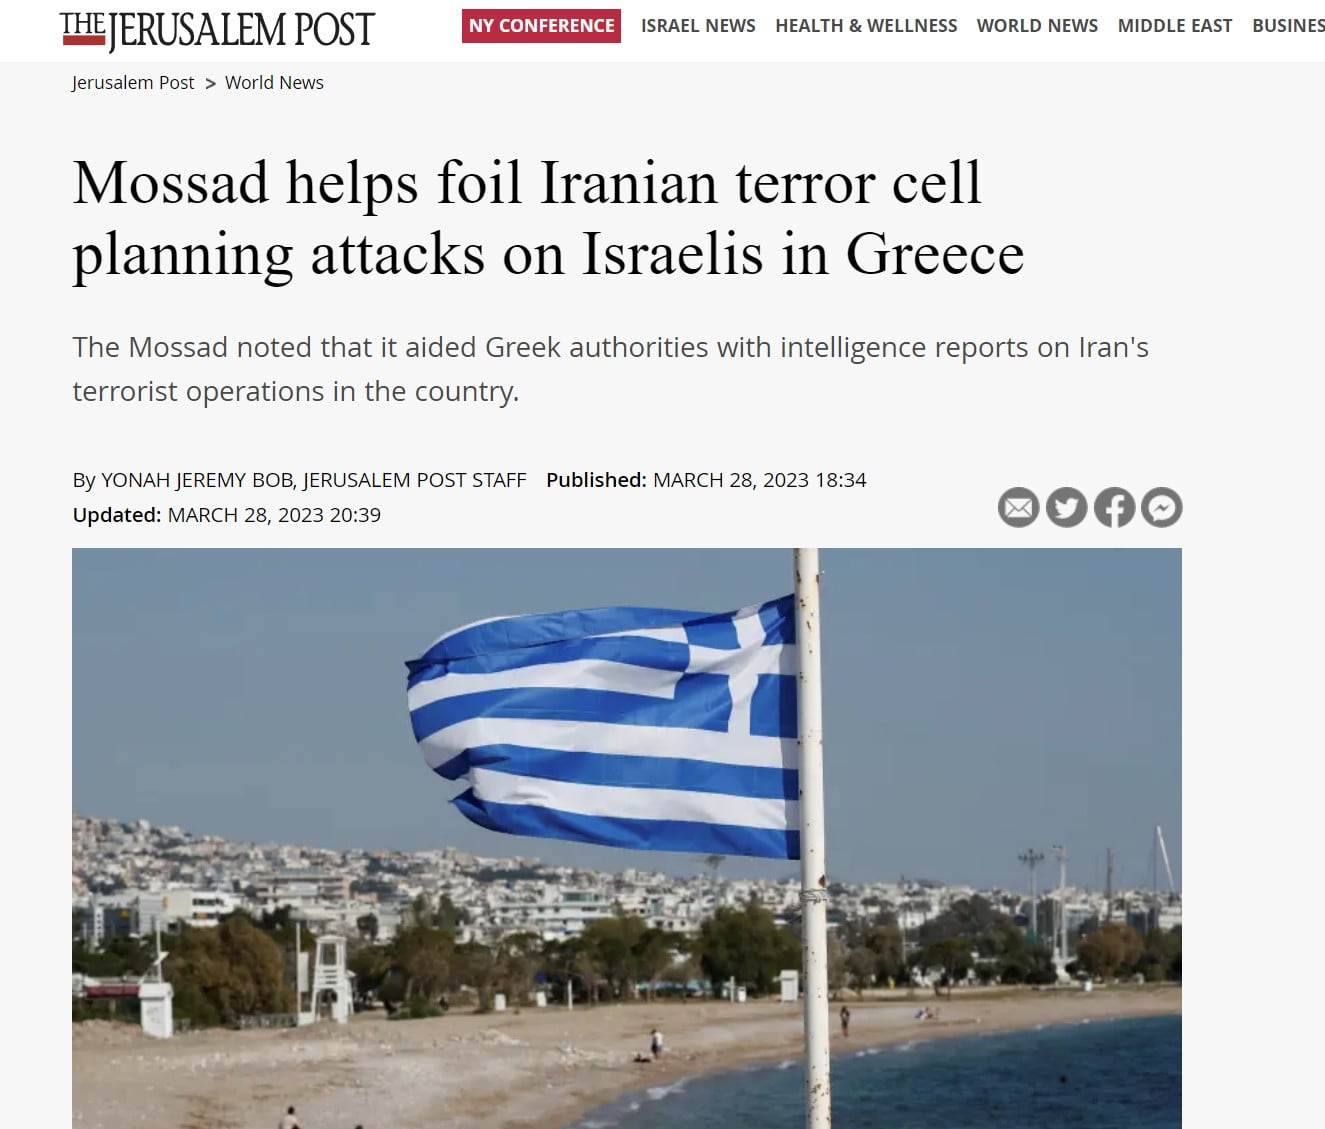 Mossad helps foil Iranian terror cell planning attacks on Israelis in Greece